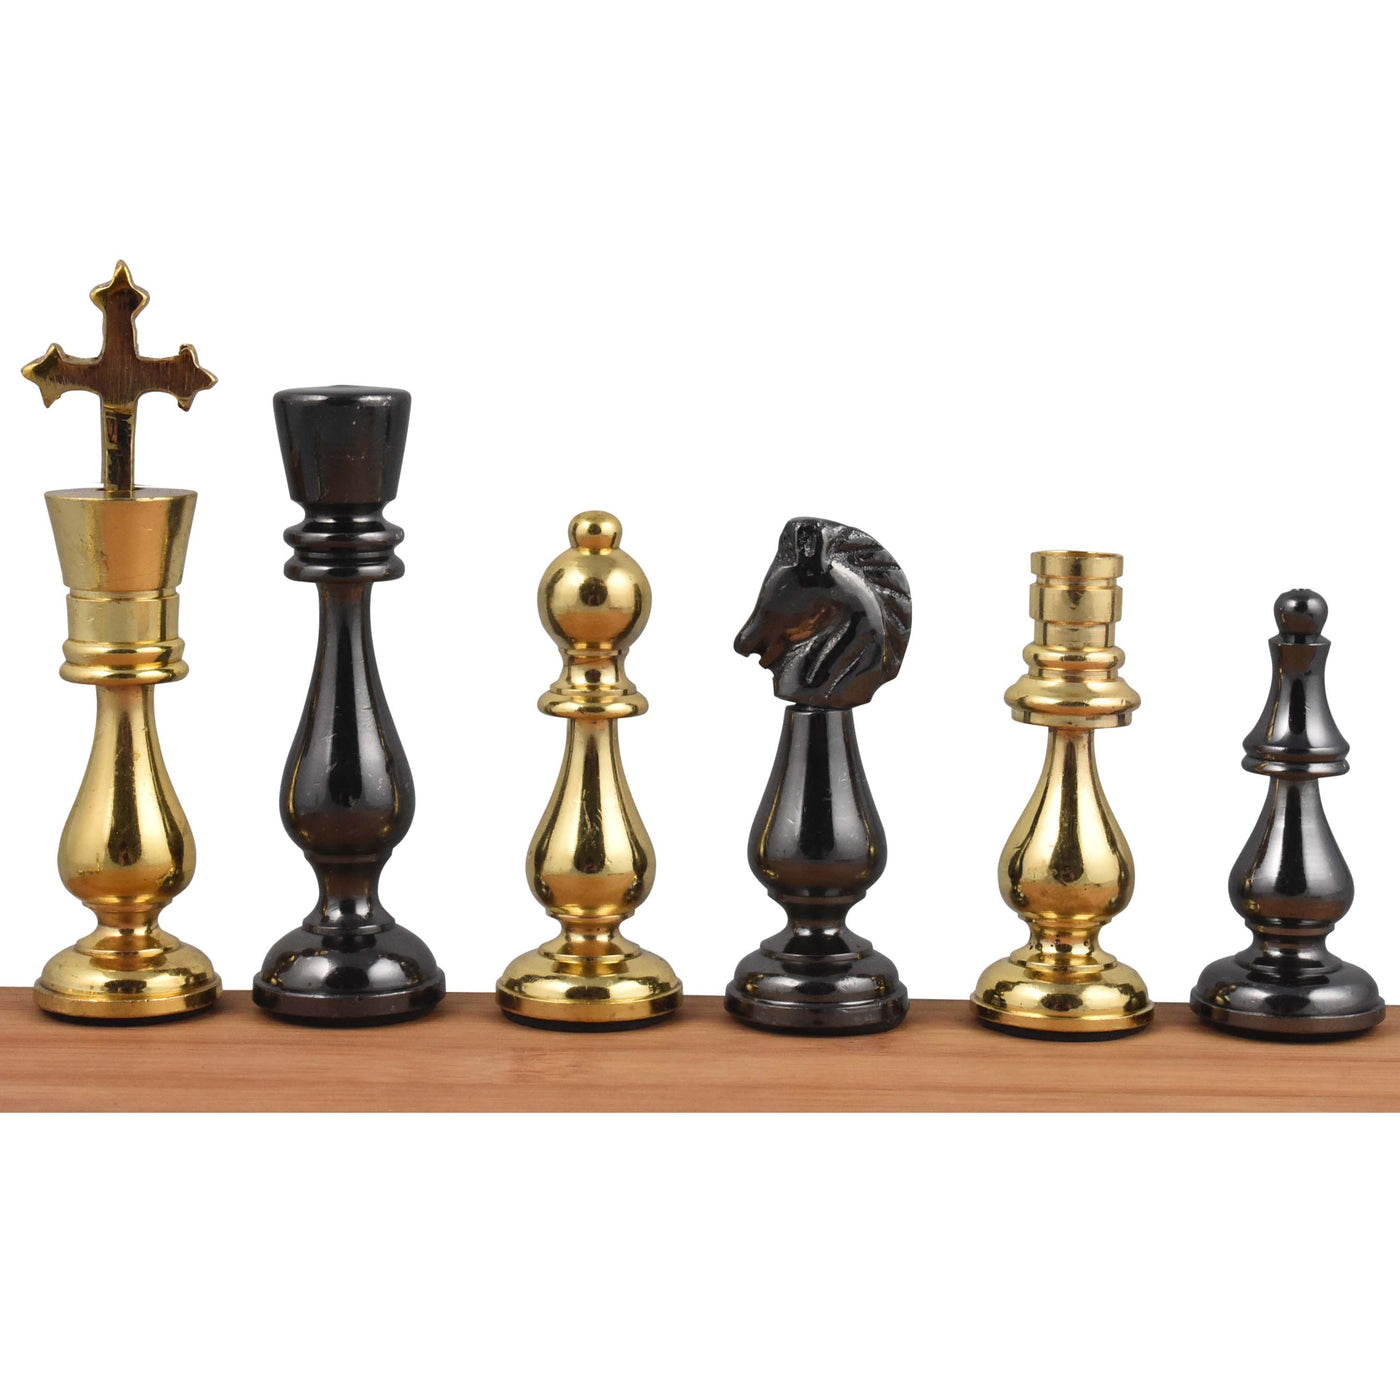 Minimalist Brass Metal Luxury Chess Pieces, Board and Table Set